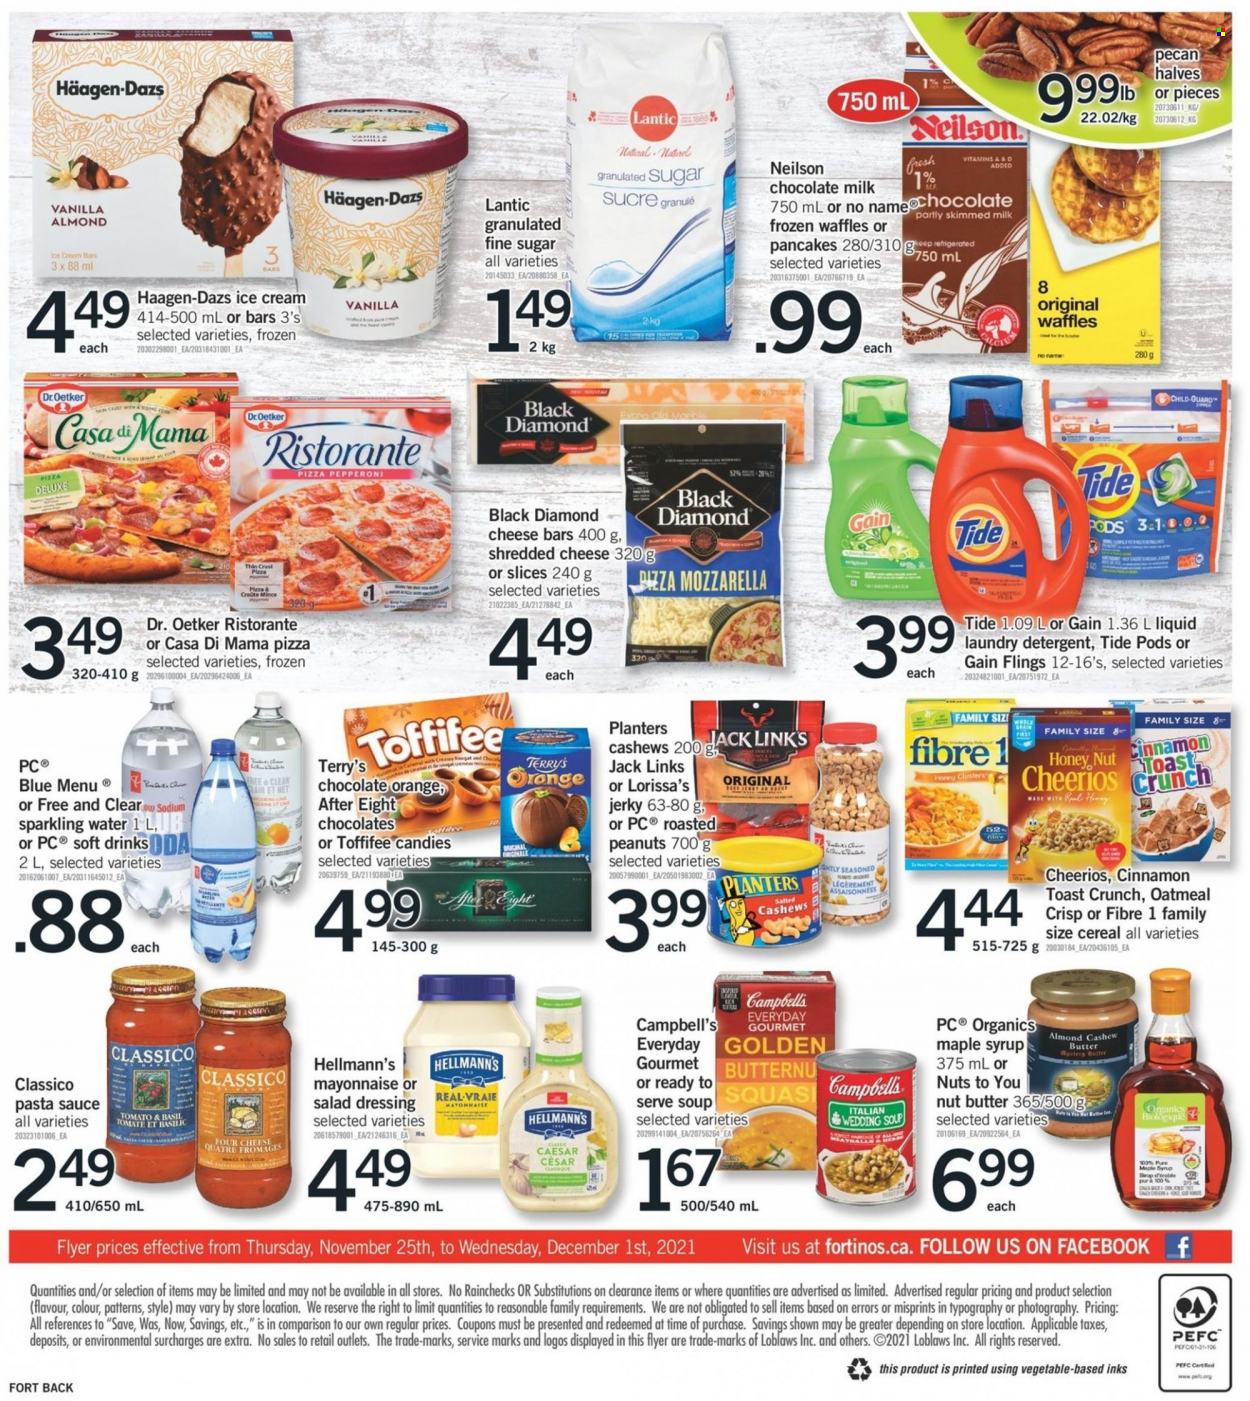 thumbnail - Fortinos Flyer - November 25, 2021 - December 01, 2021 - Sales products - waffles, No Name, Campbell's, pizza, pasta sauce, soup, sauce, pancakes, jerky, pepperoni, shredded cheese, Dr. Oetker, milk, mayonnaise, Hellmann’s, ice cream, Häagen-Dazs, milk chocolate, After Eight, Jack Link's, granulated sugar, sugar, oatmeal, cereals, Cheerios, cinnamon, salad dressing, dressing, Classico, maple syrup, cashew cream, syrup, nut butter, peanuts, Planters, soft drink, sparkling water, L'Or, Gain, Tide, laundry detergent, detergent. Page 2.